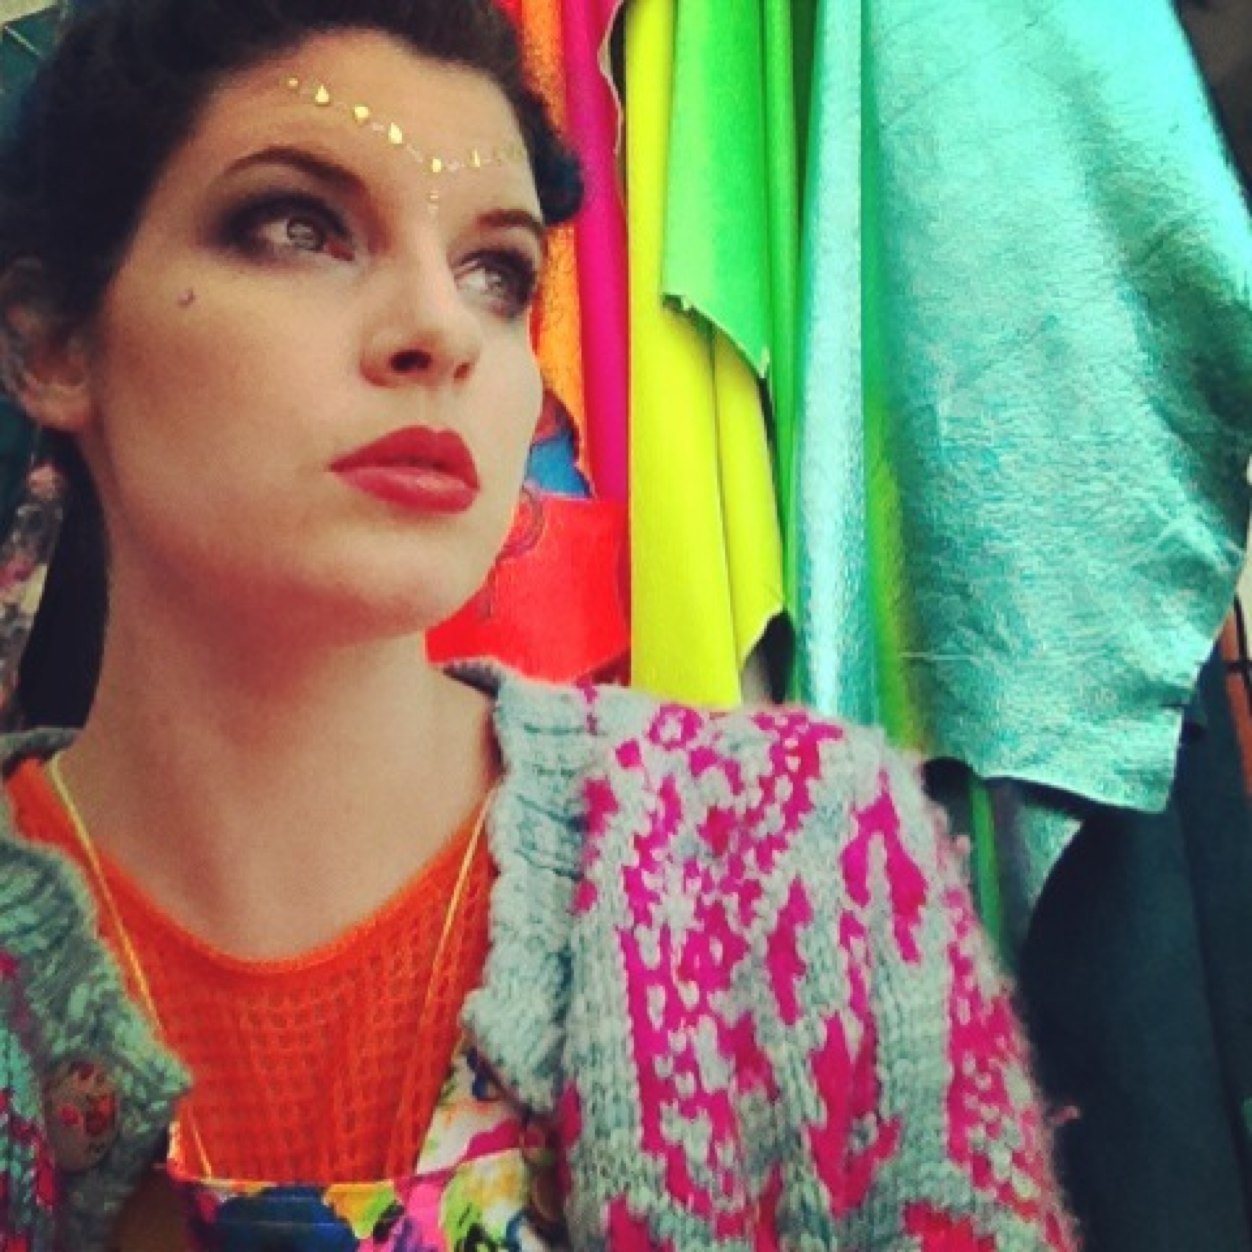 Crooked Knitwear is a eclectic fashion house currently based in Derby, UK and is owned by Megan Crook, textile guru